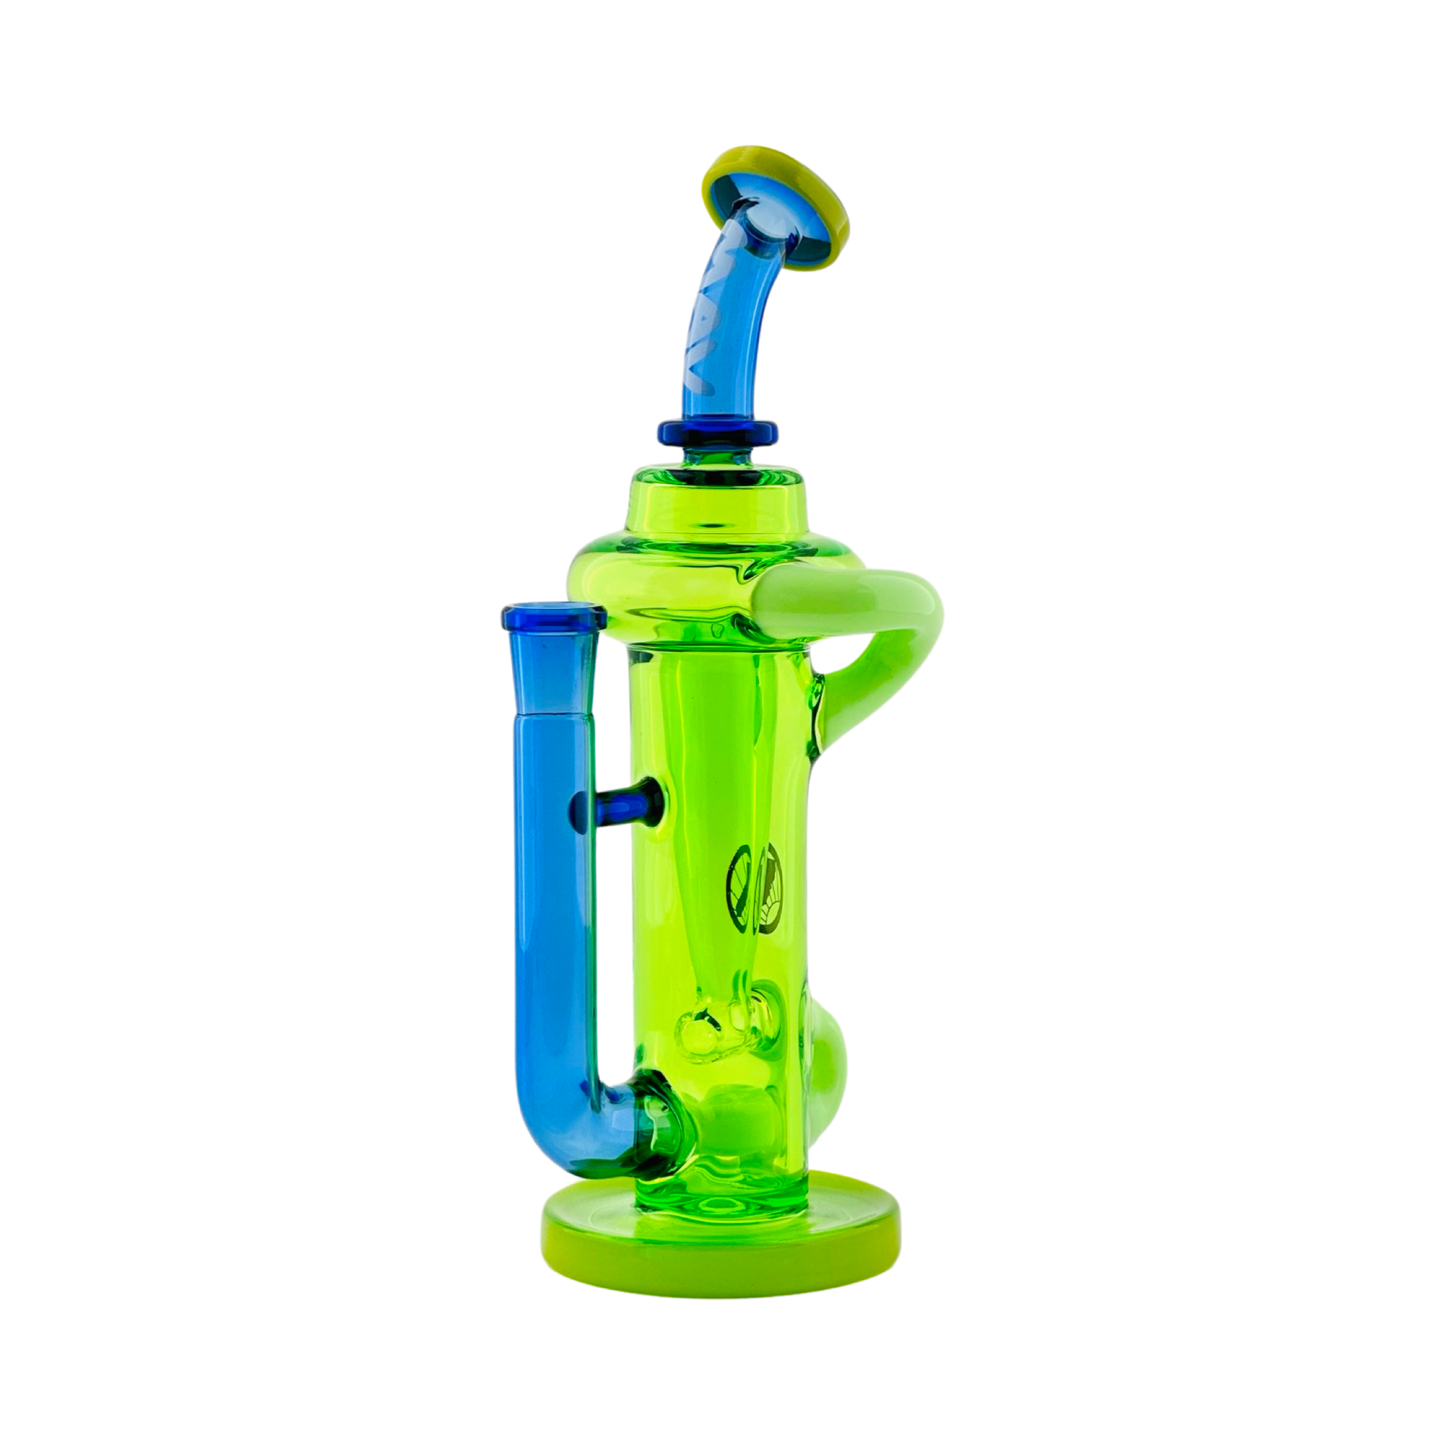 The Trestle Color Combo Recycler